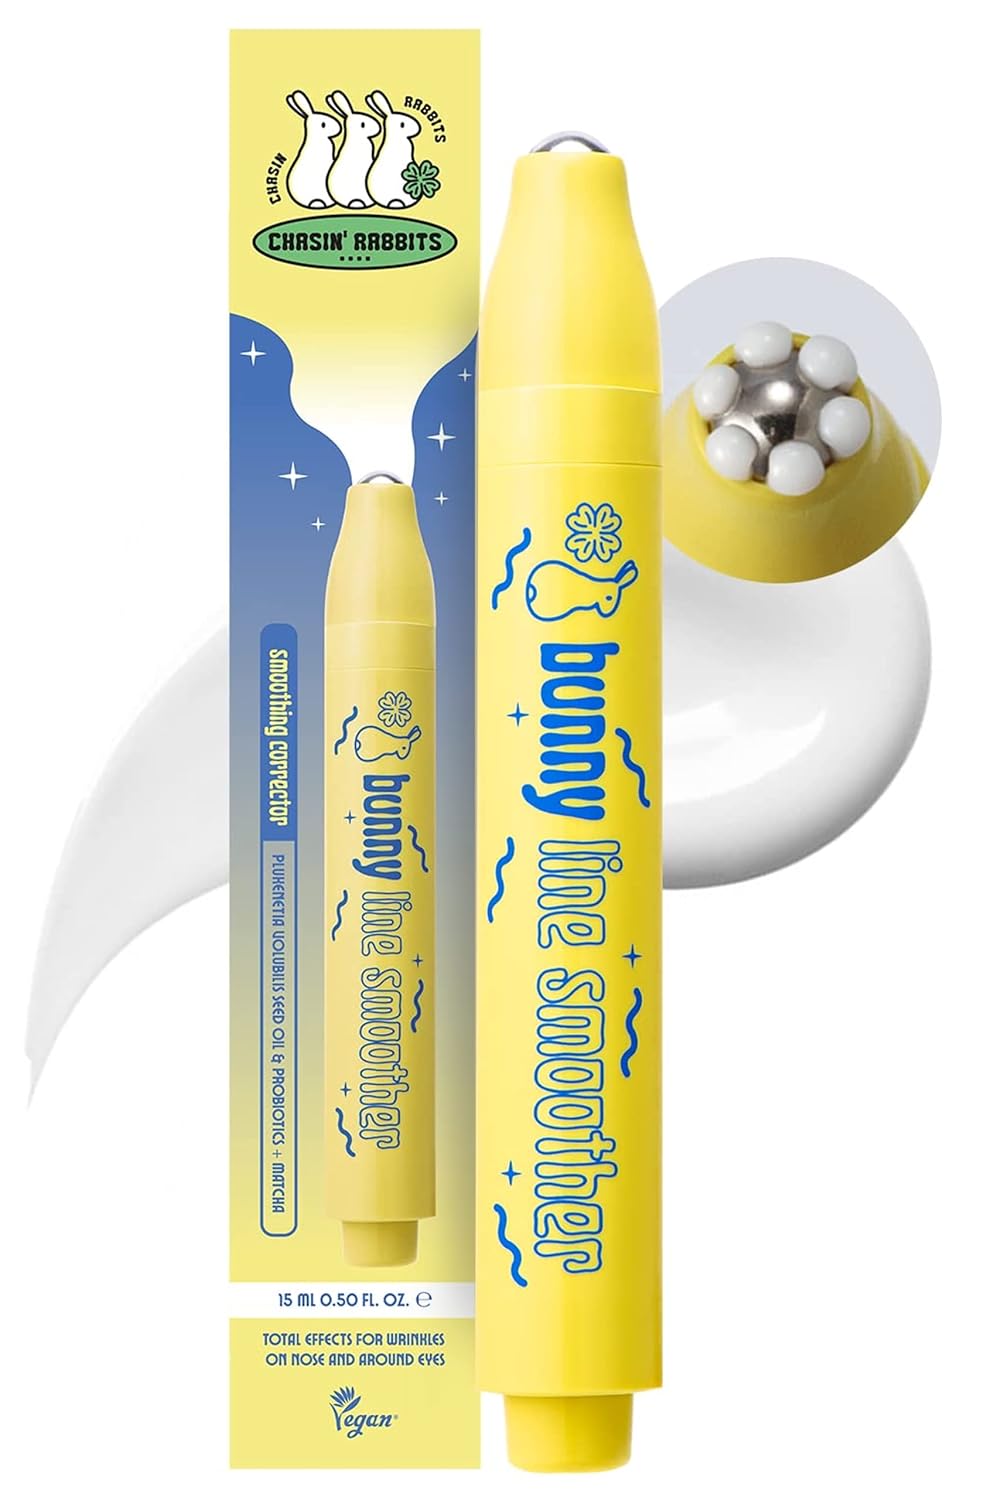 CHASIN' RABBITS Bunny Line Smoother Eye Cream Roller | Vegan Korean Skin Care Eye Cream with Surgical Steel Ball Rolling Stick | Eye Roller for Wrinkles, Dark Circles and Under Eye Bags (0.5)